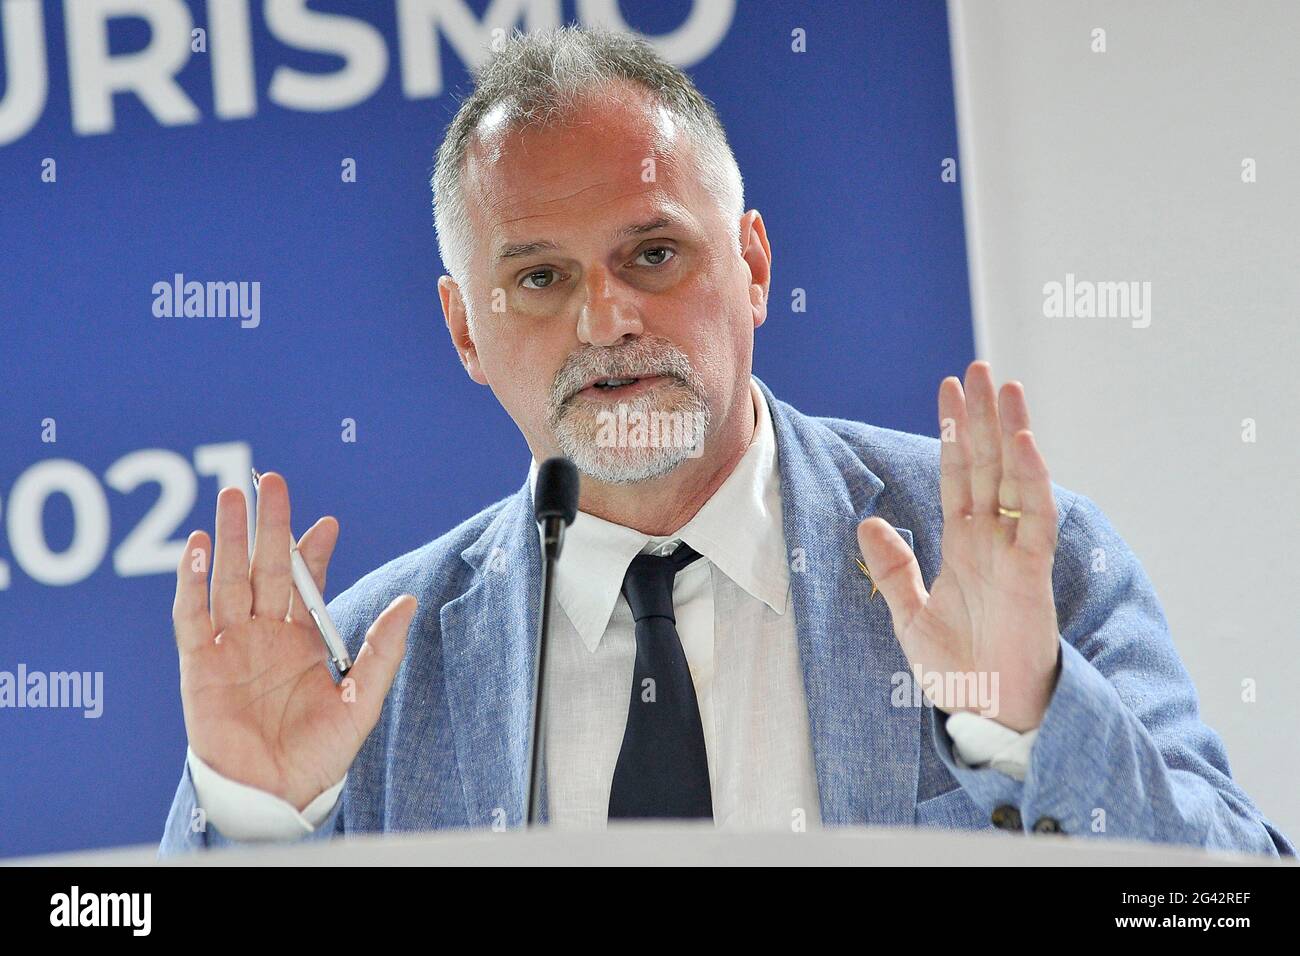 Napoli, Italy. 18th June, 2021. Massimo Garavaglia Minister of Tourism, at the opening of the 24th edition of the 'Borsa Mediterranea Del Turismo', which was held in Naples at the Mostra D'Oltremare. Naples, Italy, June 18, 2021. (photo by Vincenzo Izzo/Sipa USA) Credit: Sipa USA/Alamy Live News Stock Photo